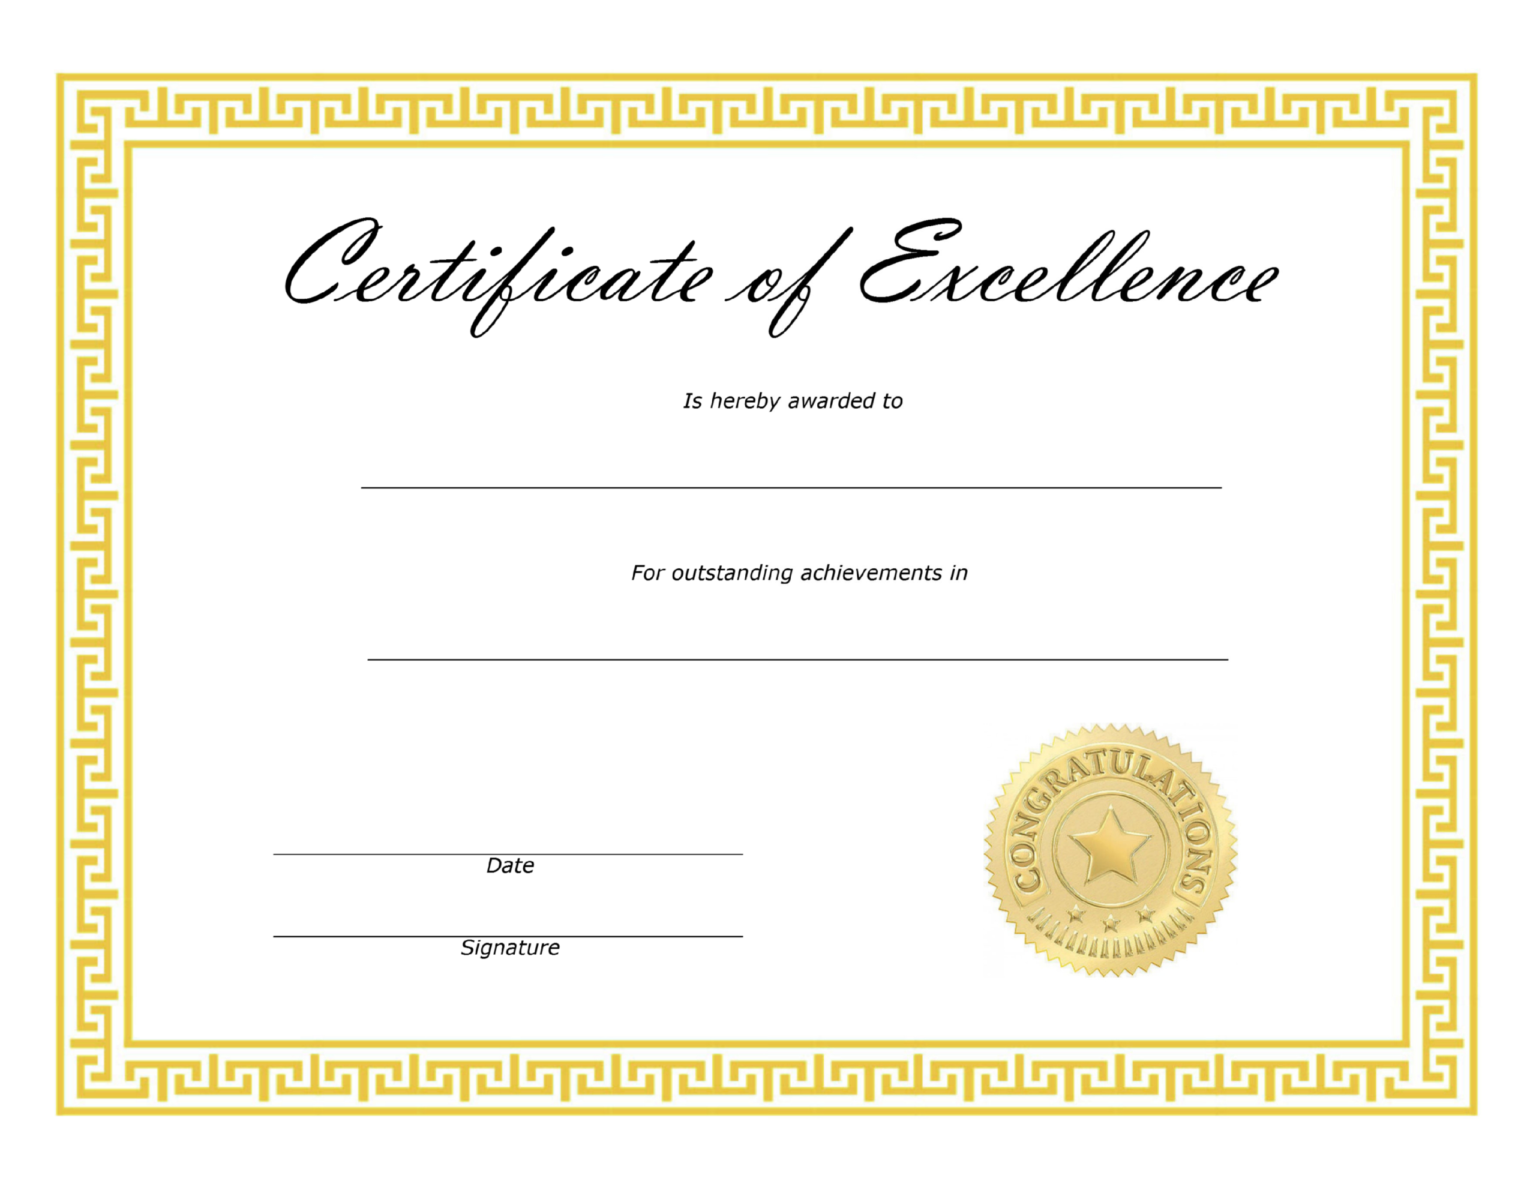 simple-free-certificate-of-excellence-template-thevanitydiaries